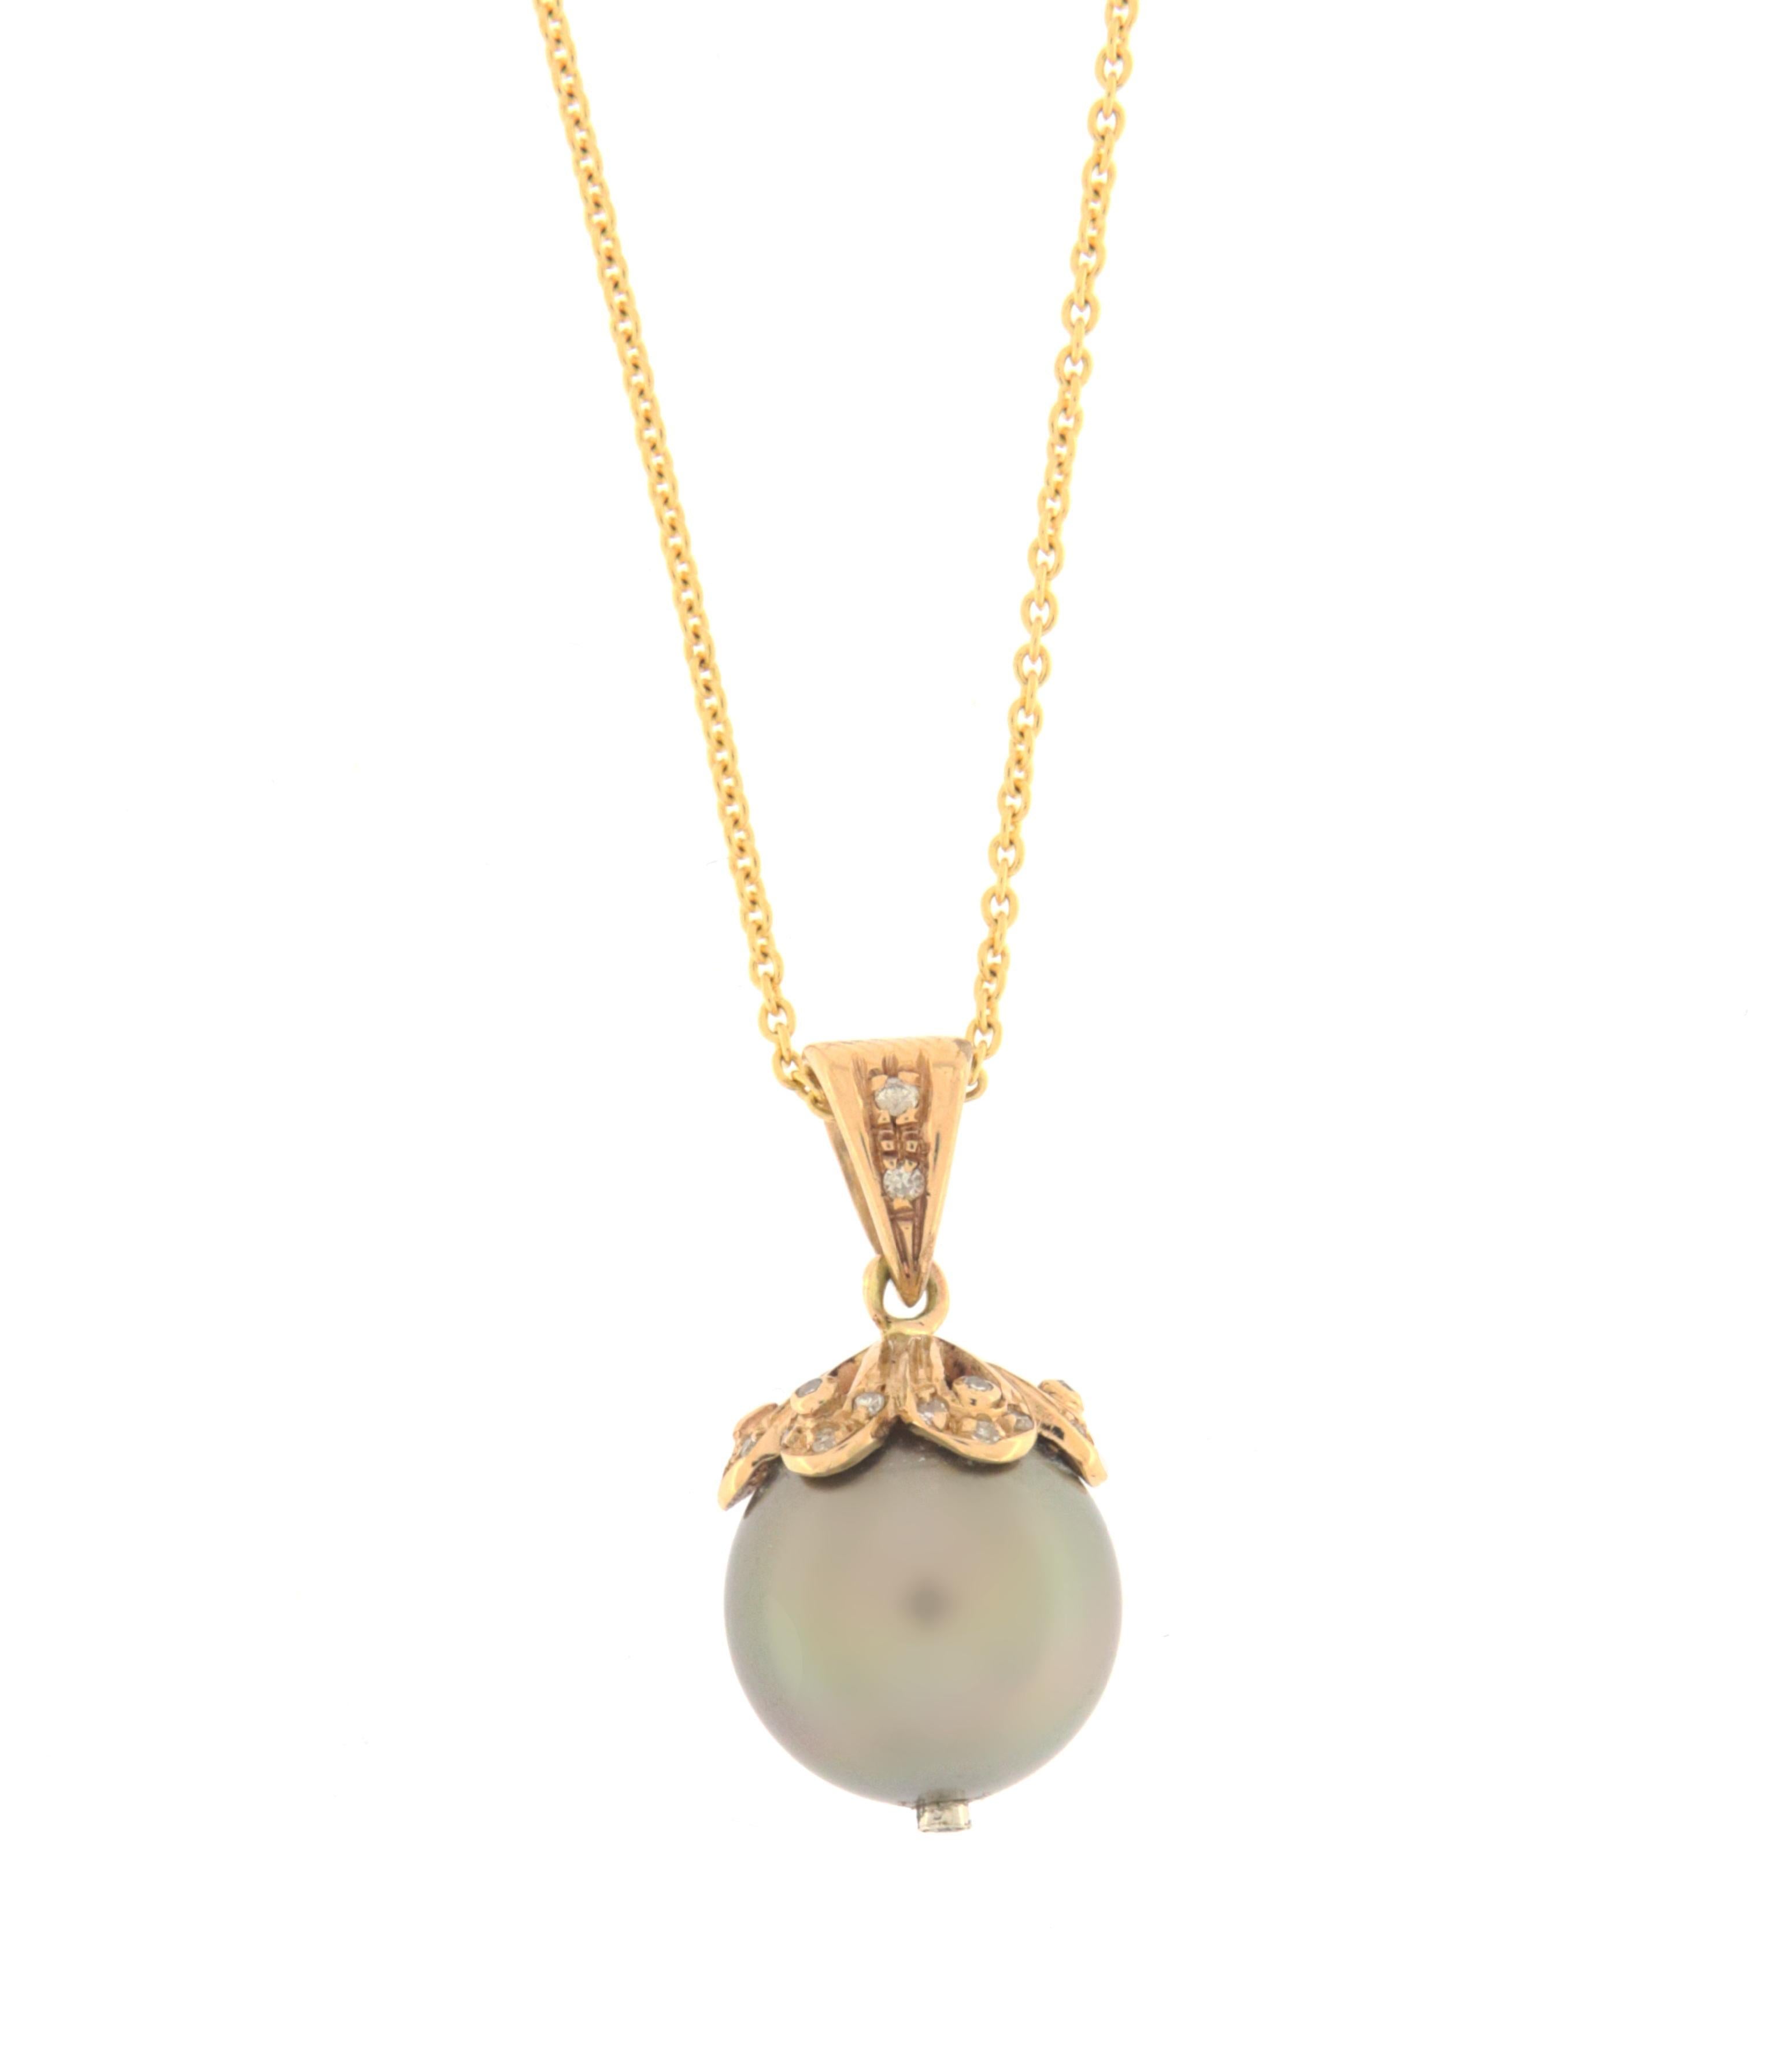 Beautiful 14 karat yellow gold pendant necklace.Handmade by our craftsmen assembled with diamonds and Tahitian Pearl

Diamonds weight 0.14 karat
Necklace total weight 7.60 grams
Pearl size 12.80 mm
Chain length 43 cm